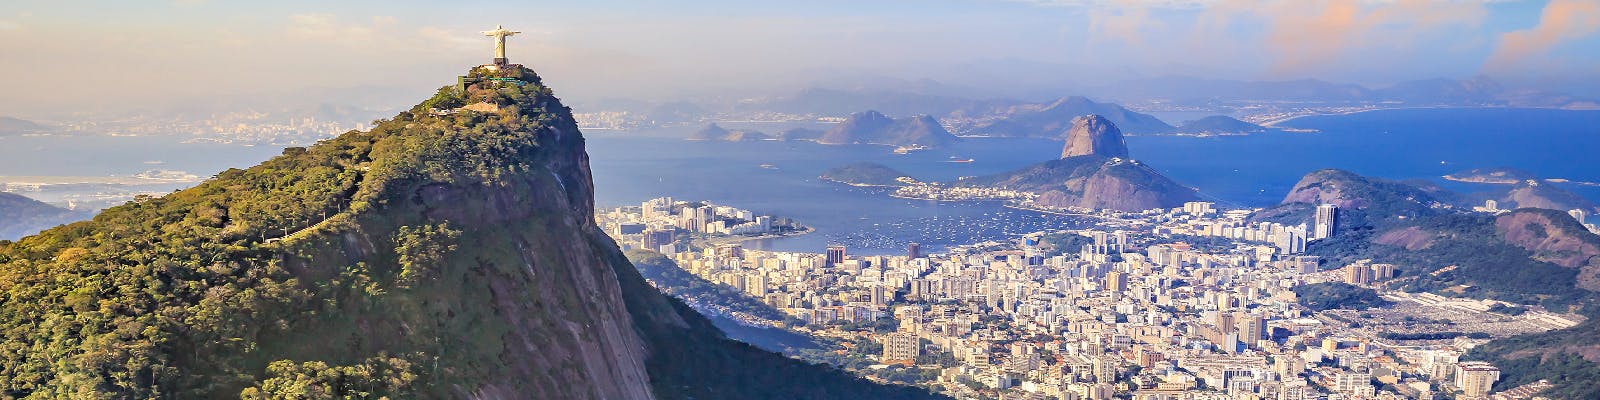 Customize your South America trip